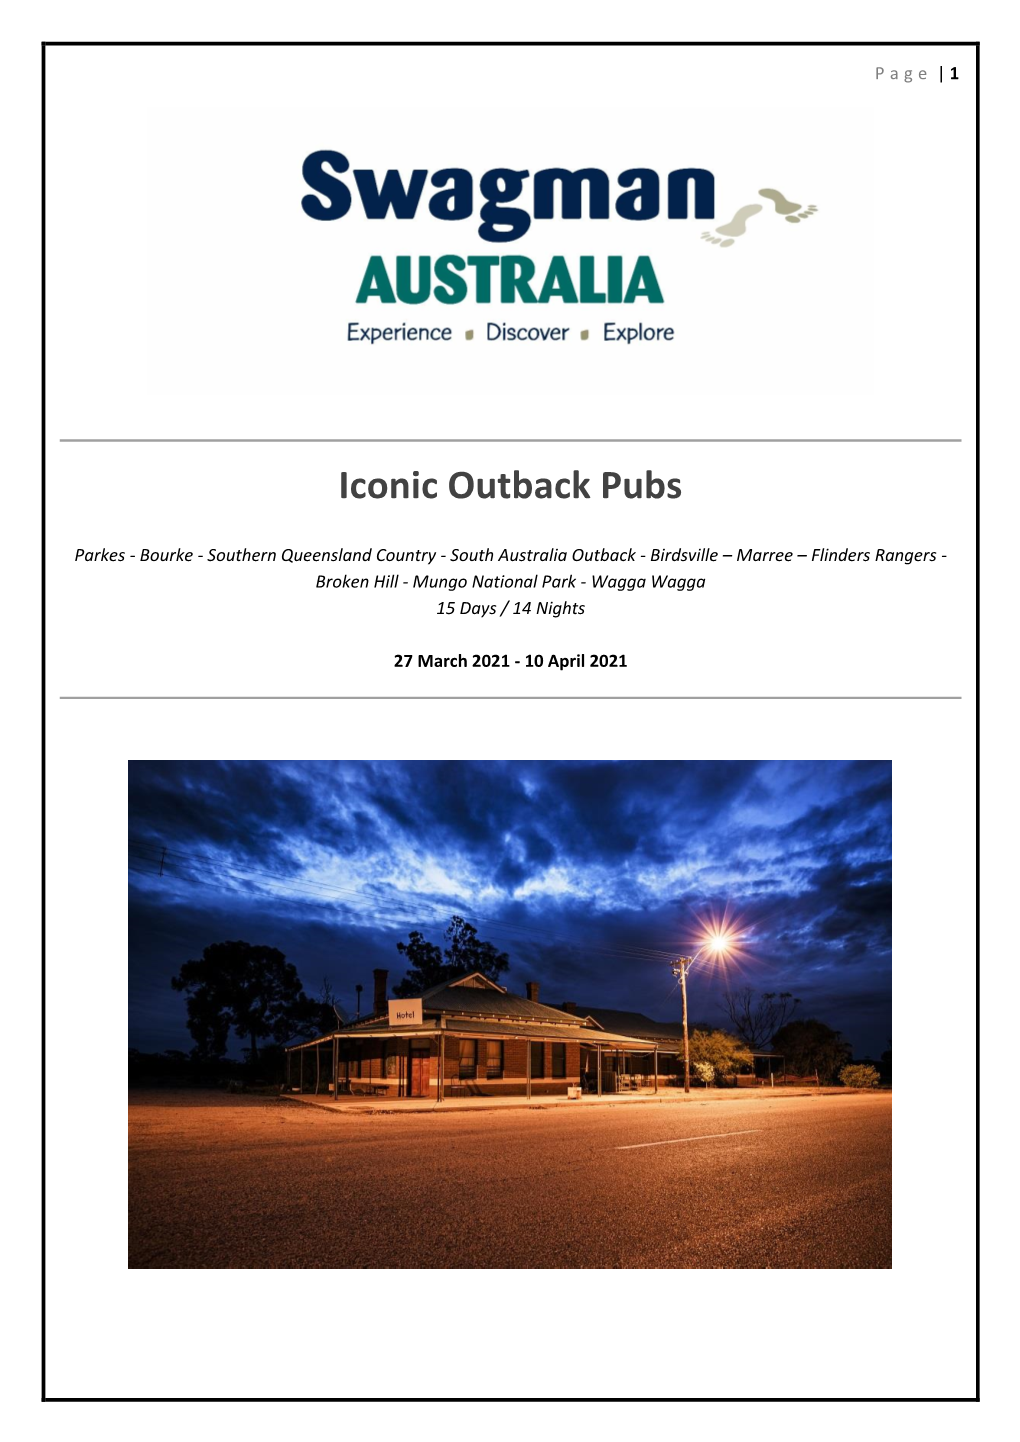 Iconic Outback Pubs